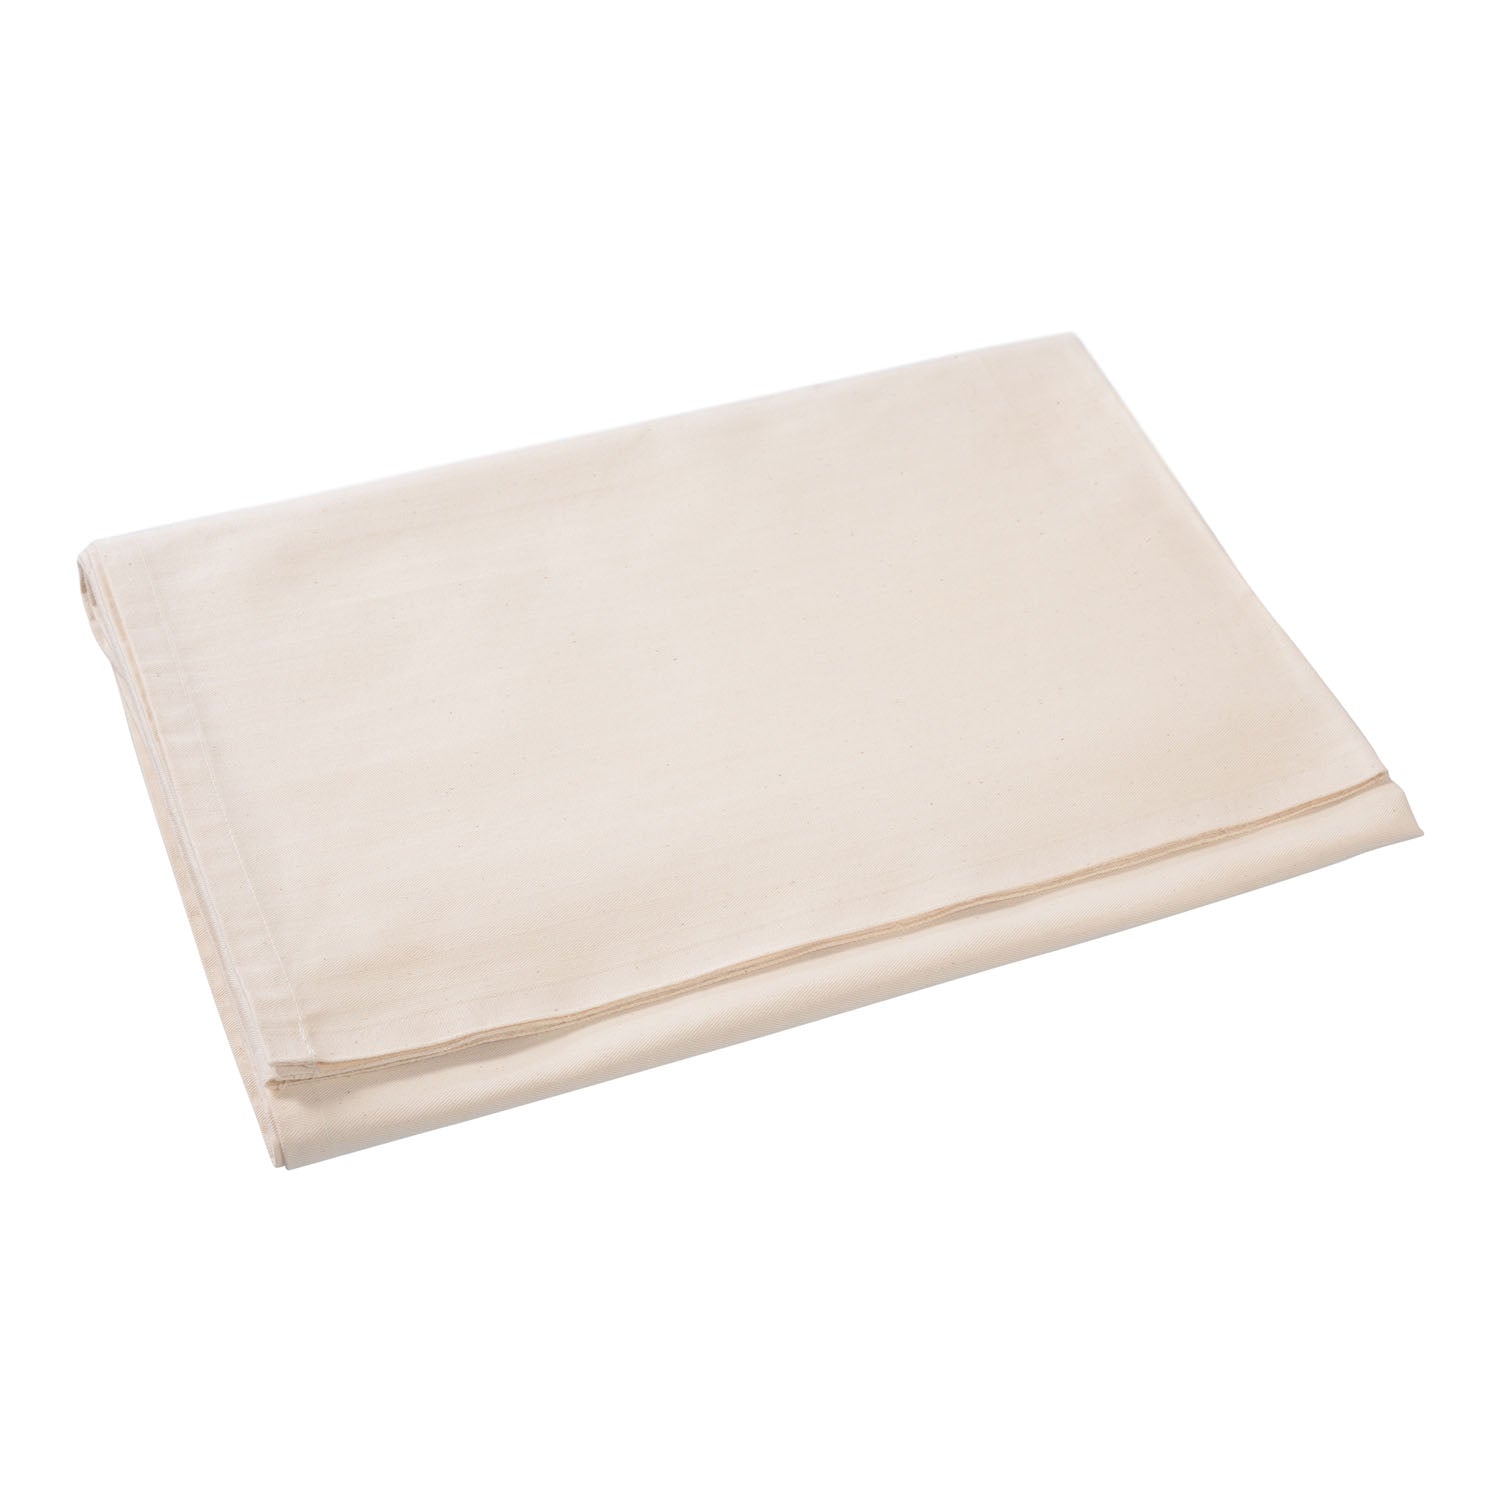 Commercial Draw Sheet for Patients | Australian Linen Supply